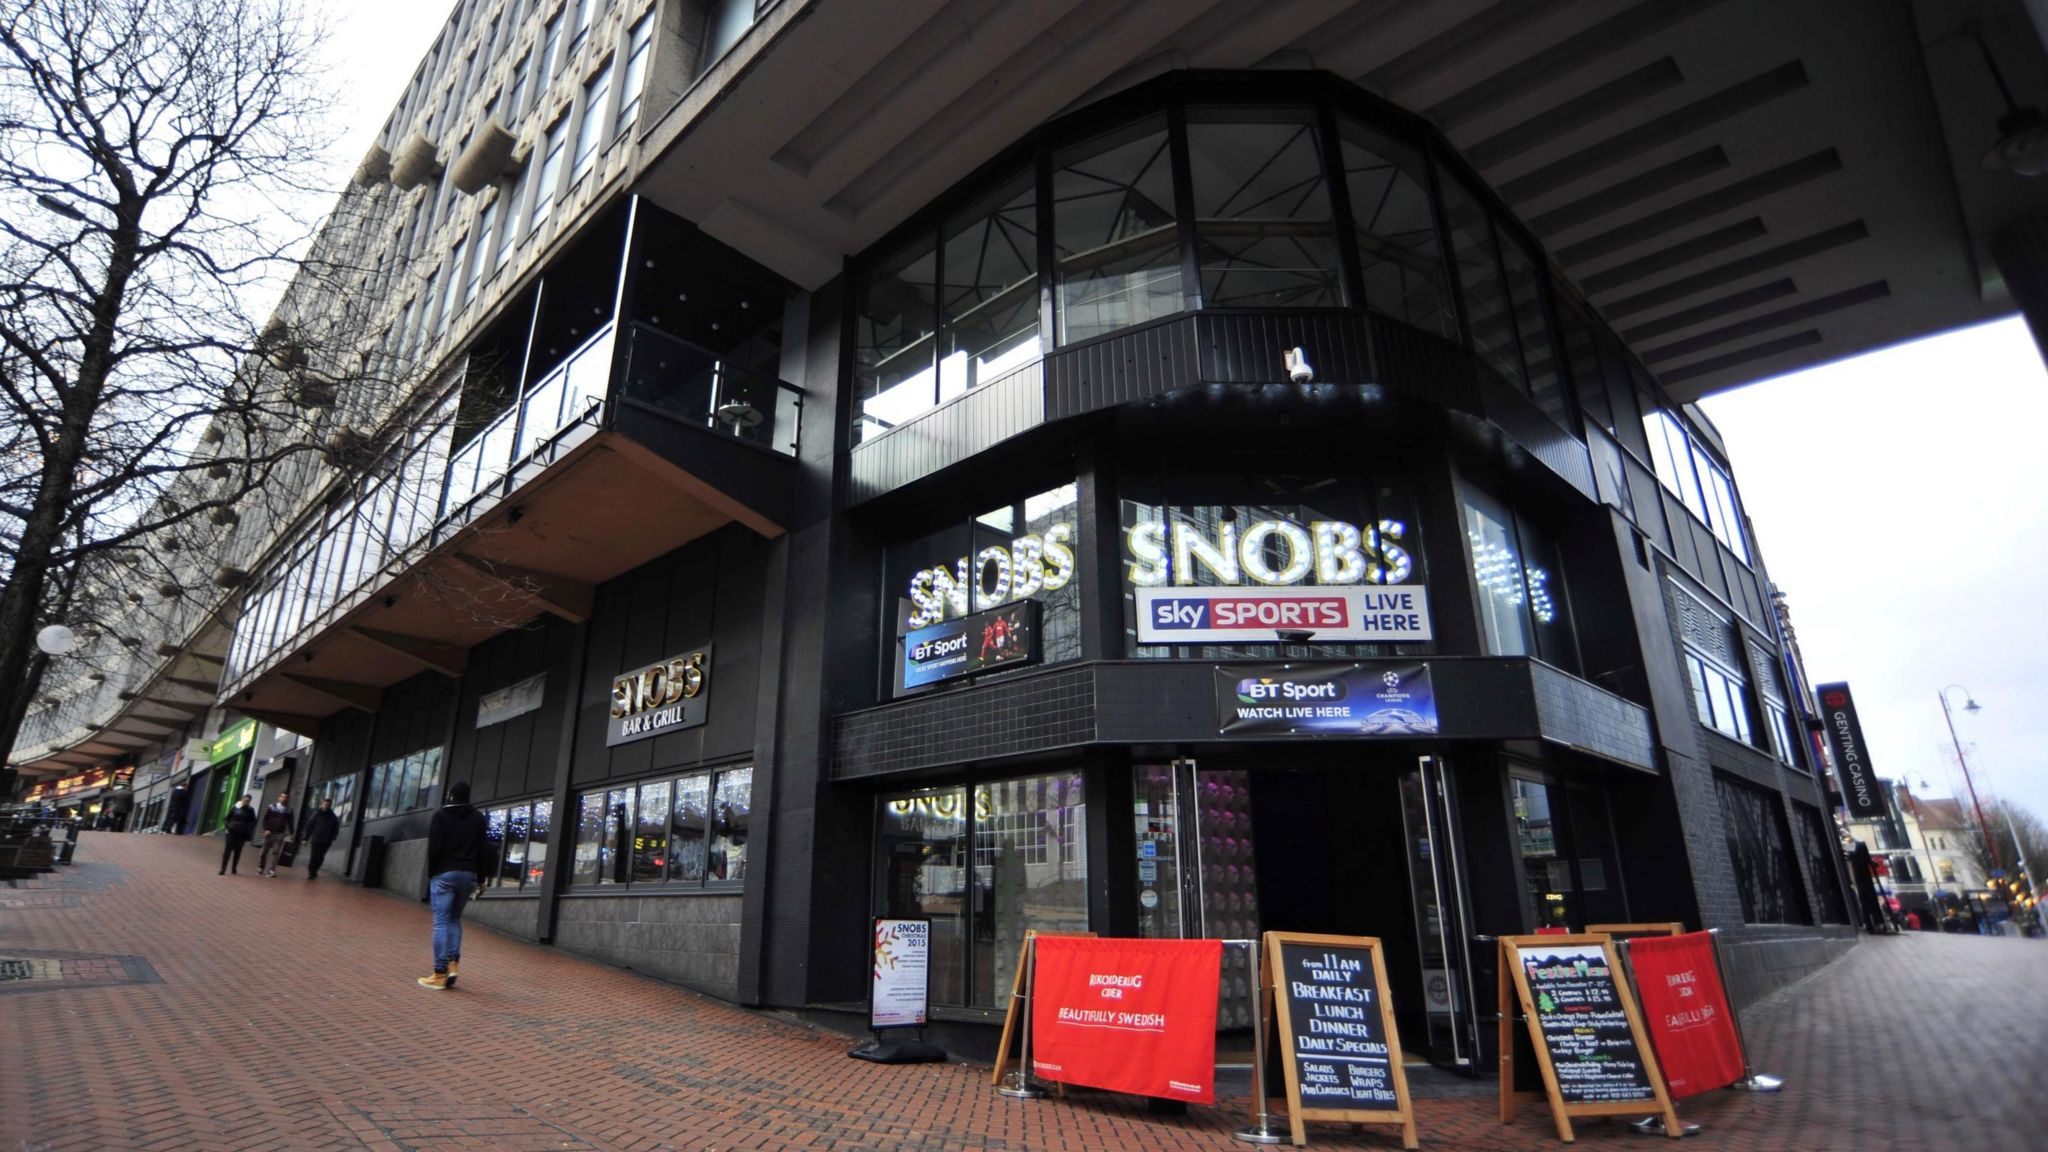 Snobs current location at 51 Smallbrook Queensway